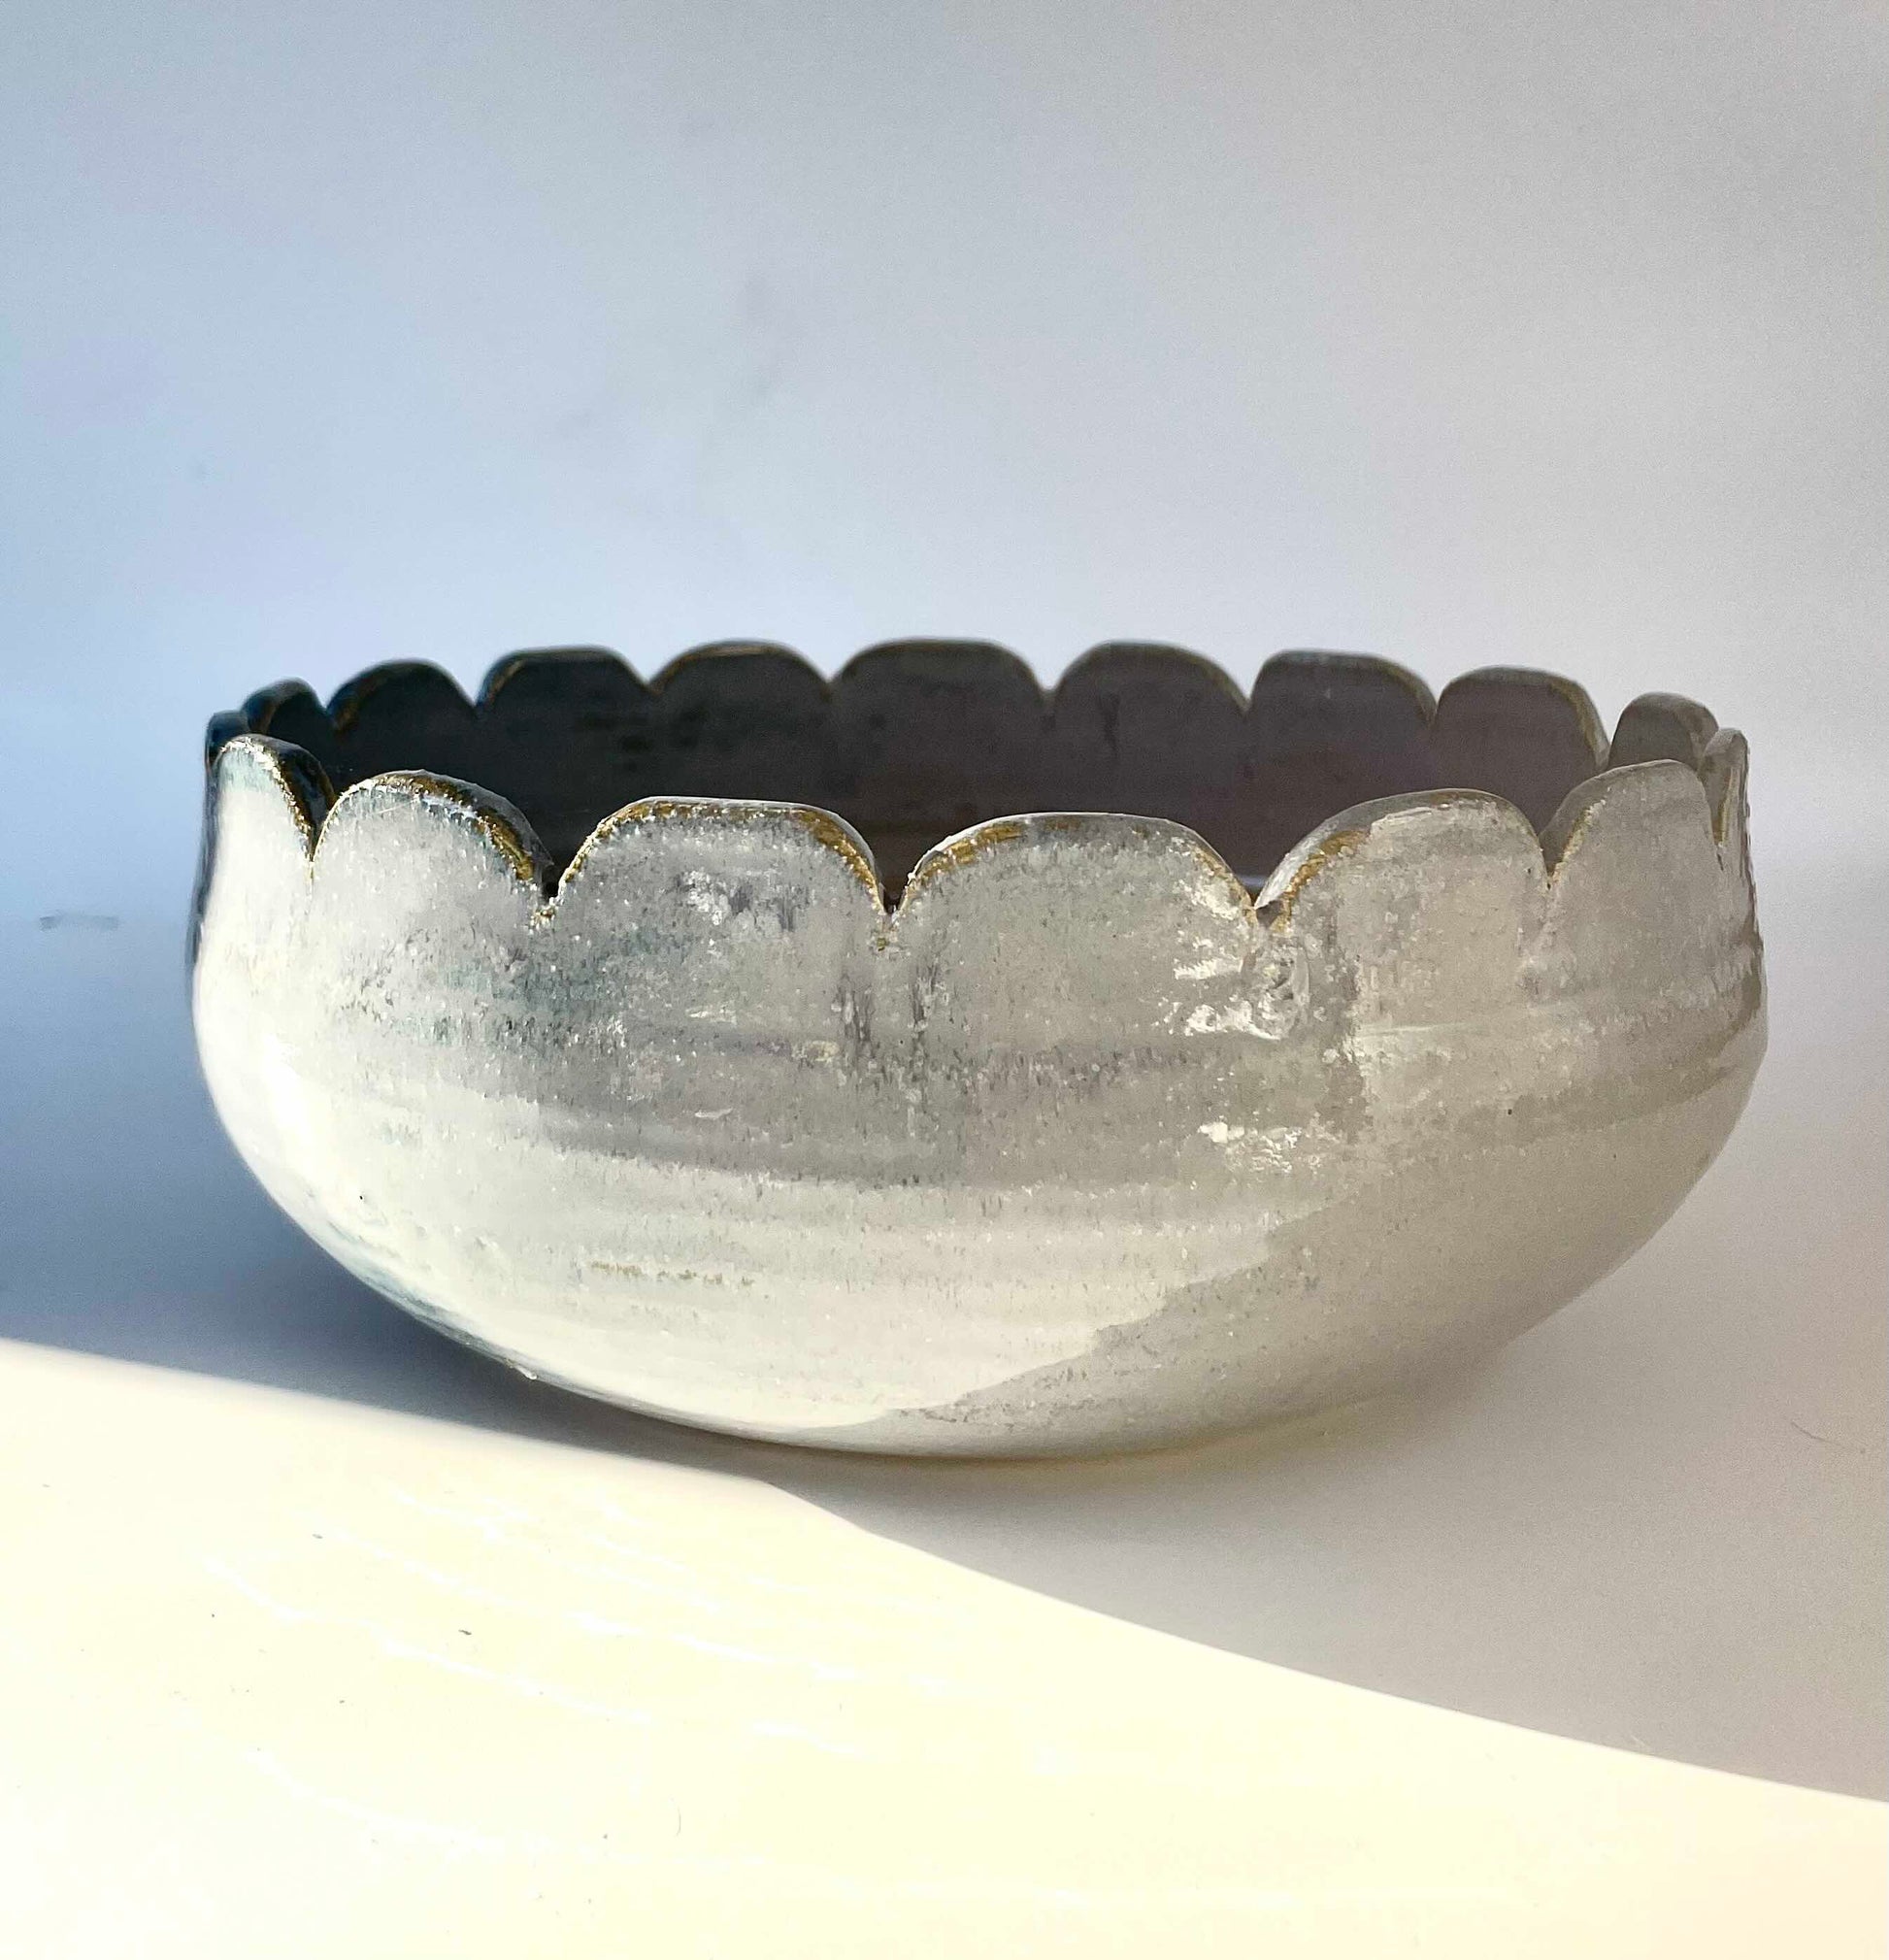 scallop edged serving bowl by Hey Moon Ceramics. Glazed in glossy grey blue